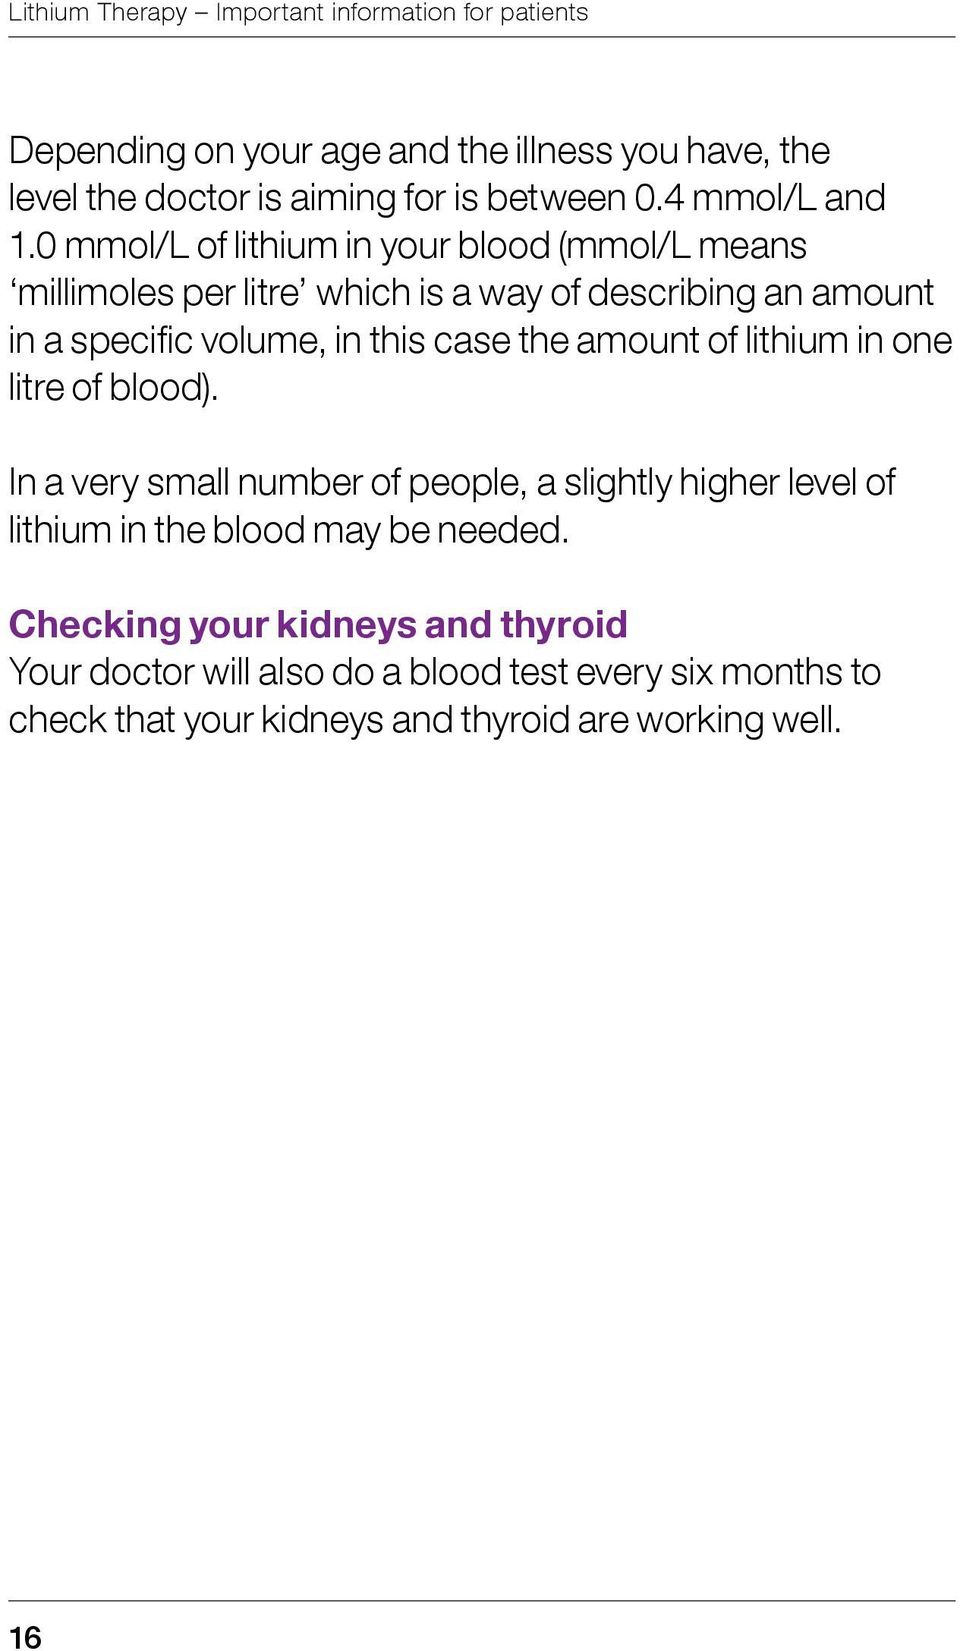 0 mmol/l of lithium in your blood (mmol/l means millimoles per litre which is a way of describing an amount in a specific volume, in this case the